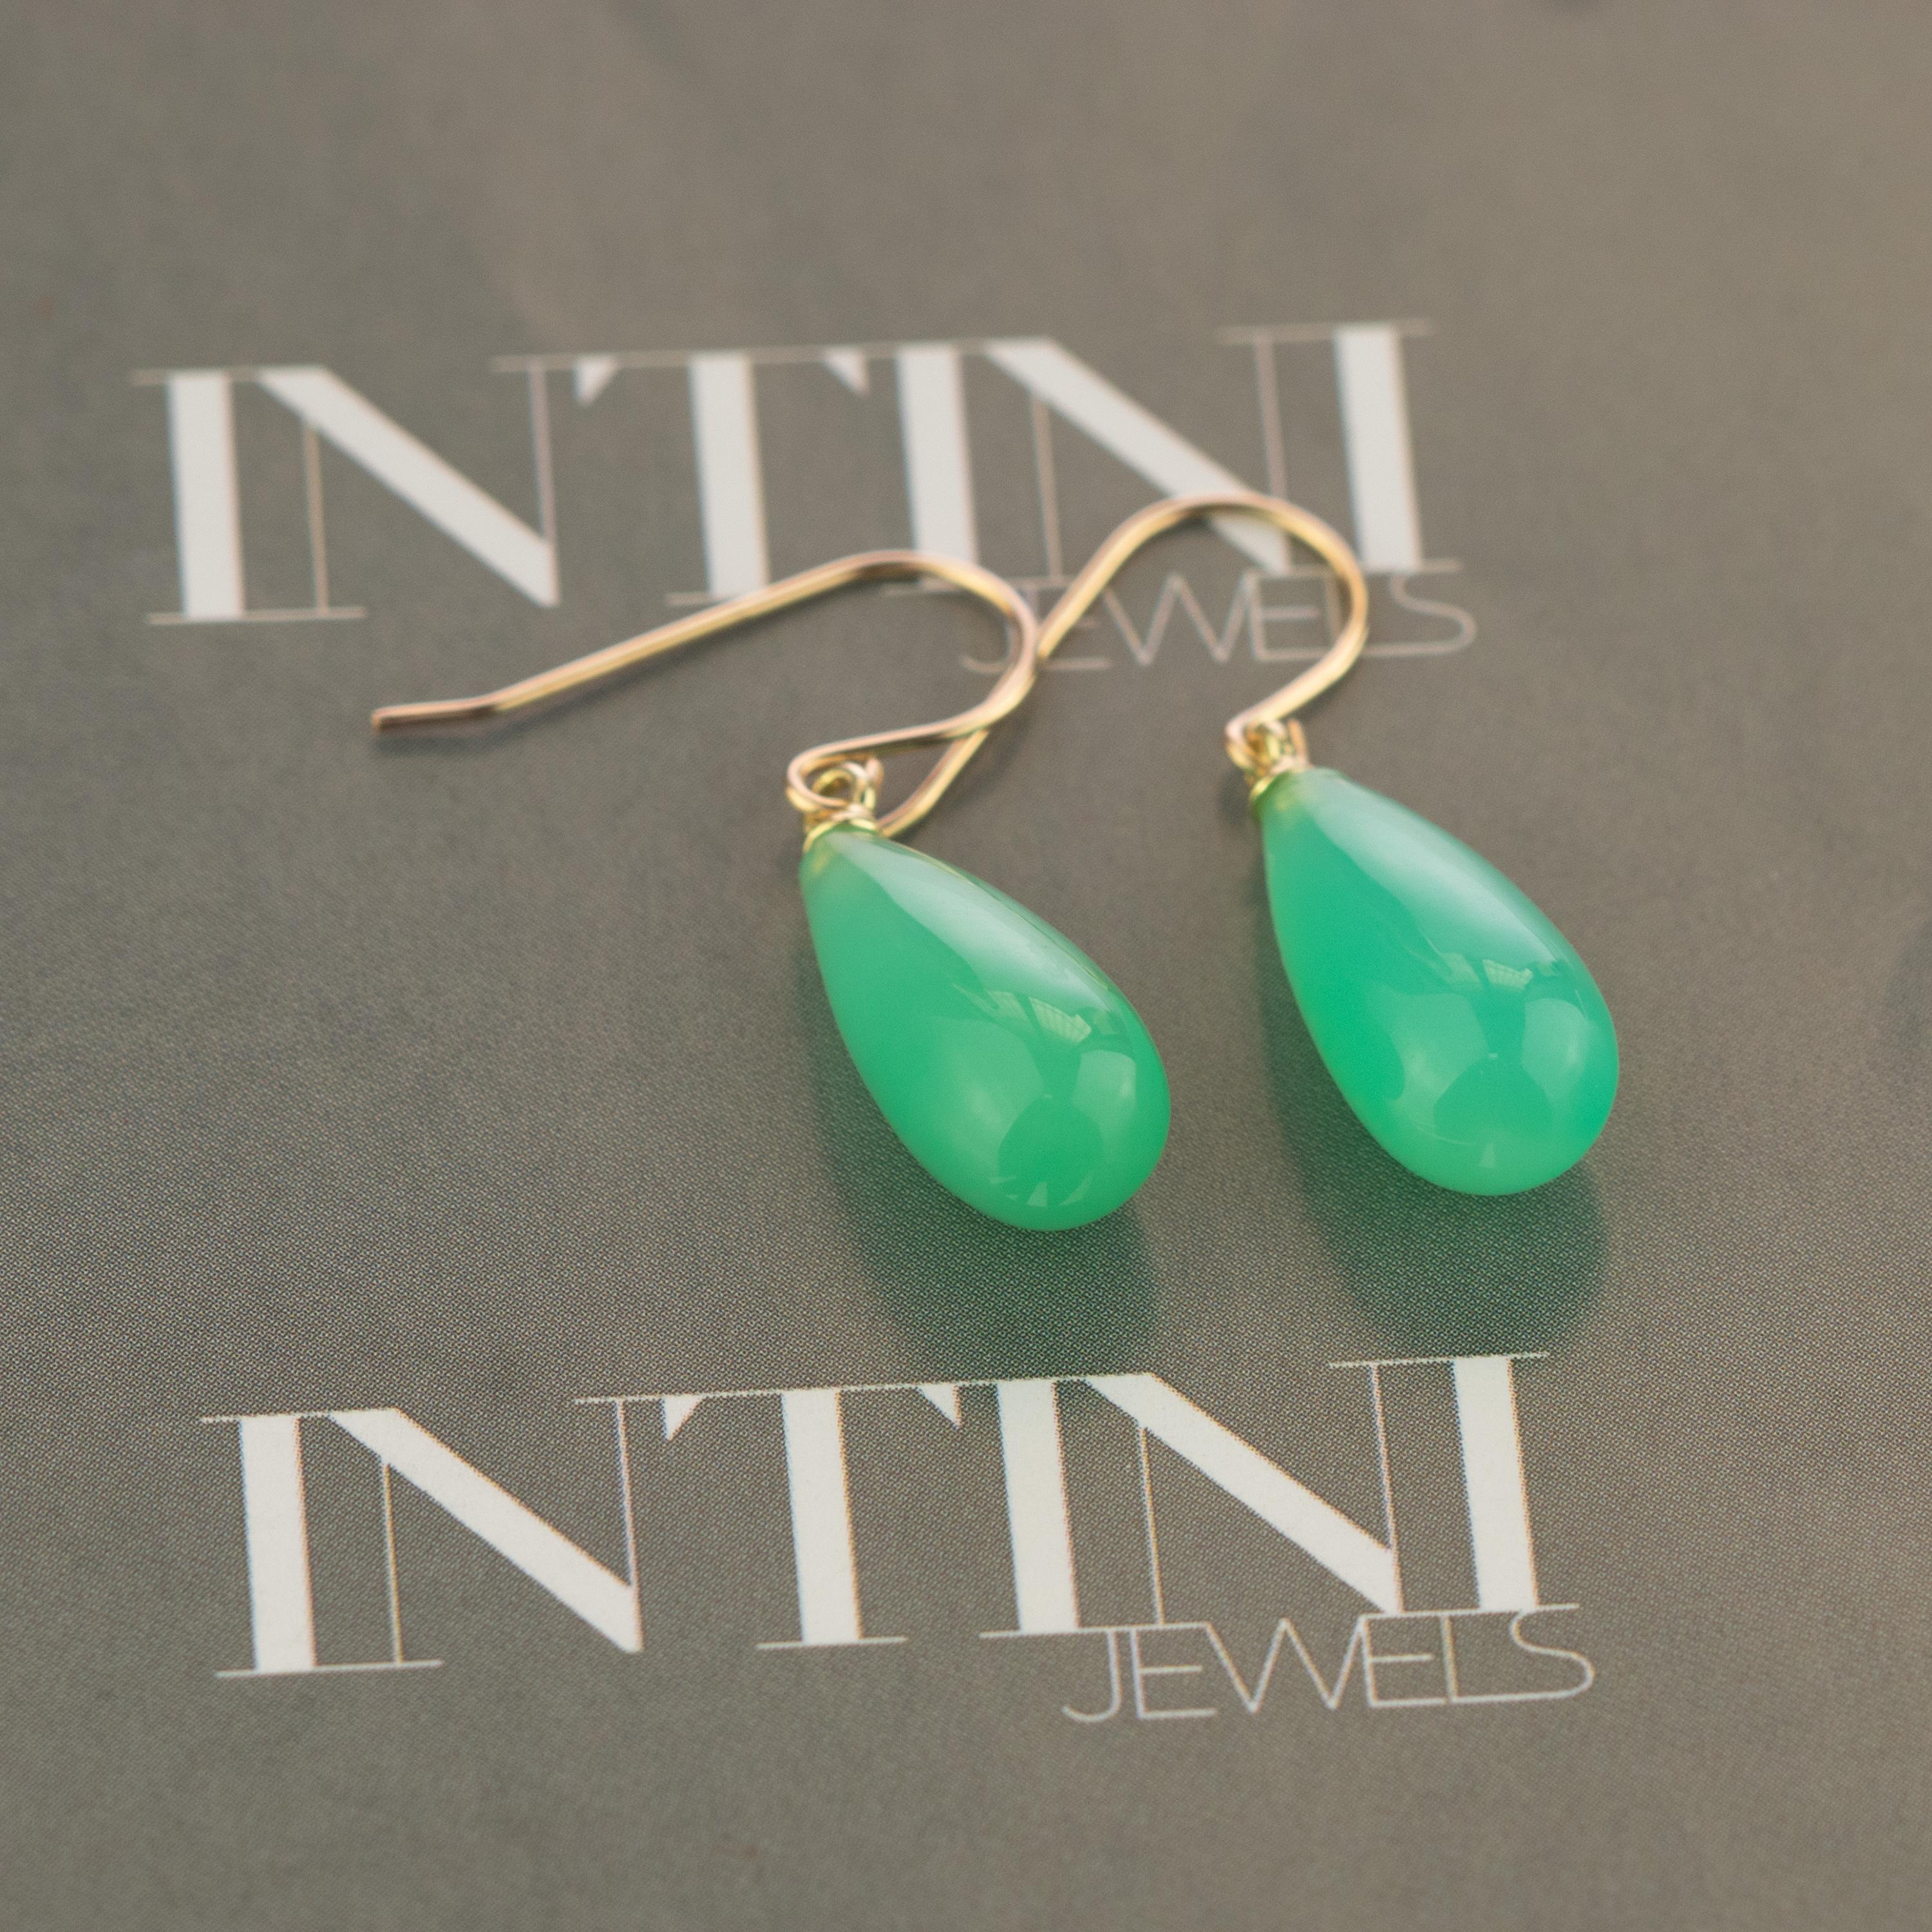 Dreamy translucent green 5 carat chrysophrase pear briolette earrings, embellished with 18 karat yellow gold in a unique drop tear-pear shape. Let Intini Jewels, our traditonal Handmade Milanese brand, surprise you with fashionable accessories and